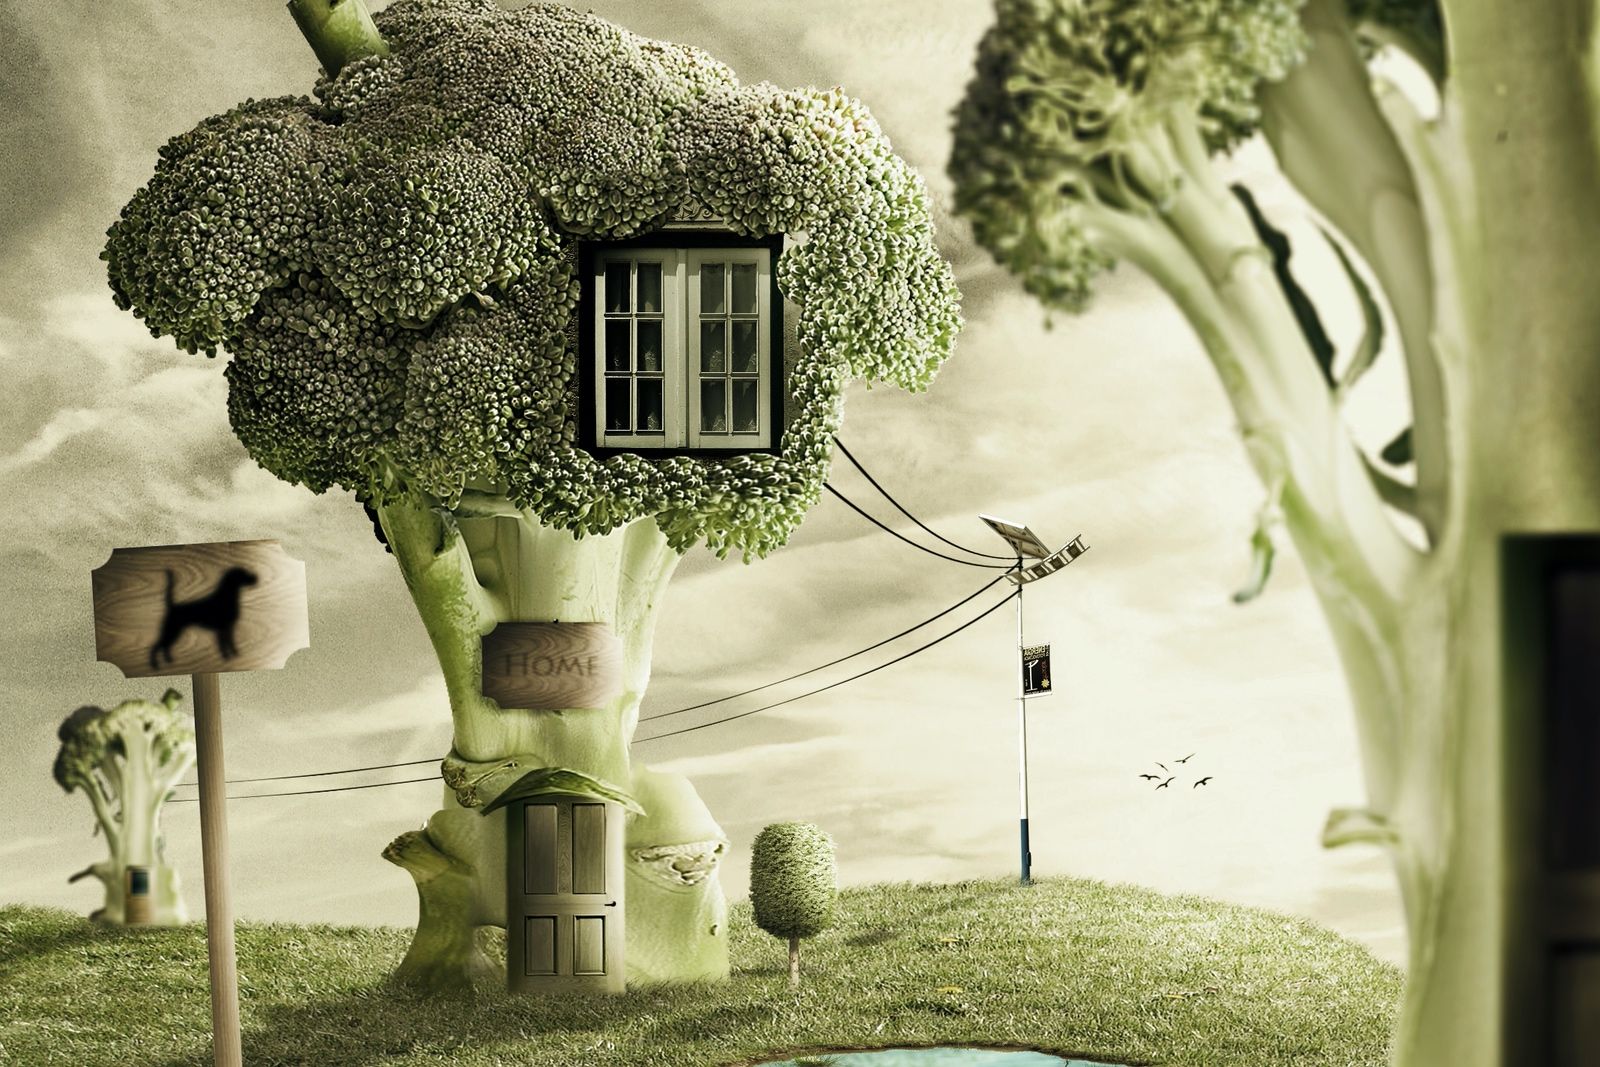 Check Out These Amazing Photoshop Jobs - Making Edible Architecture image 1